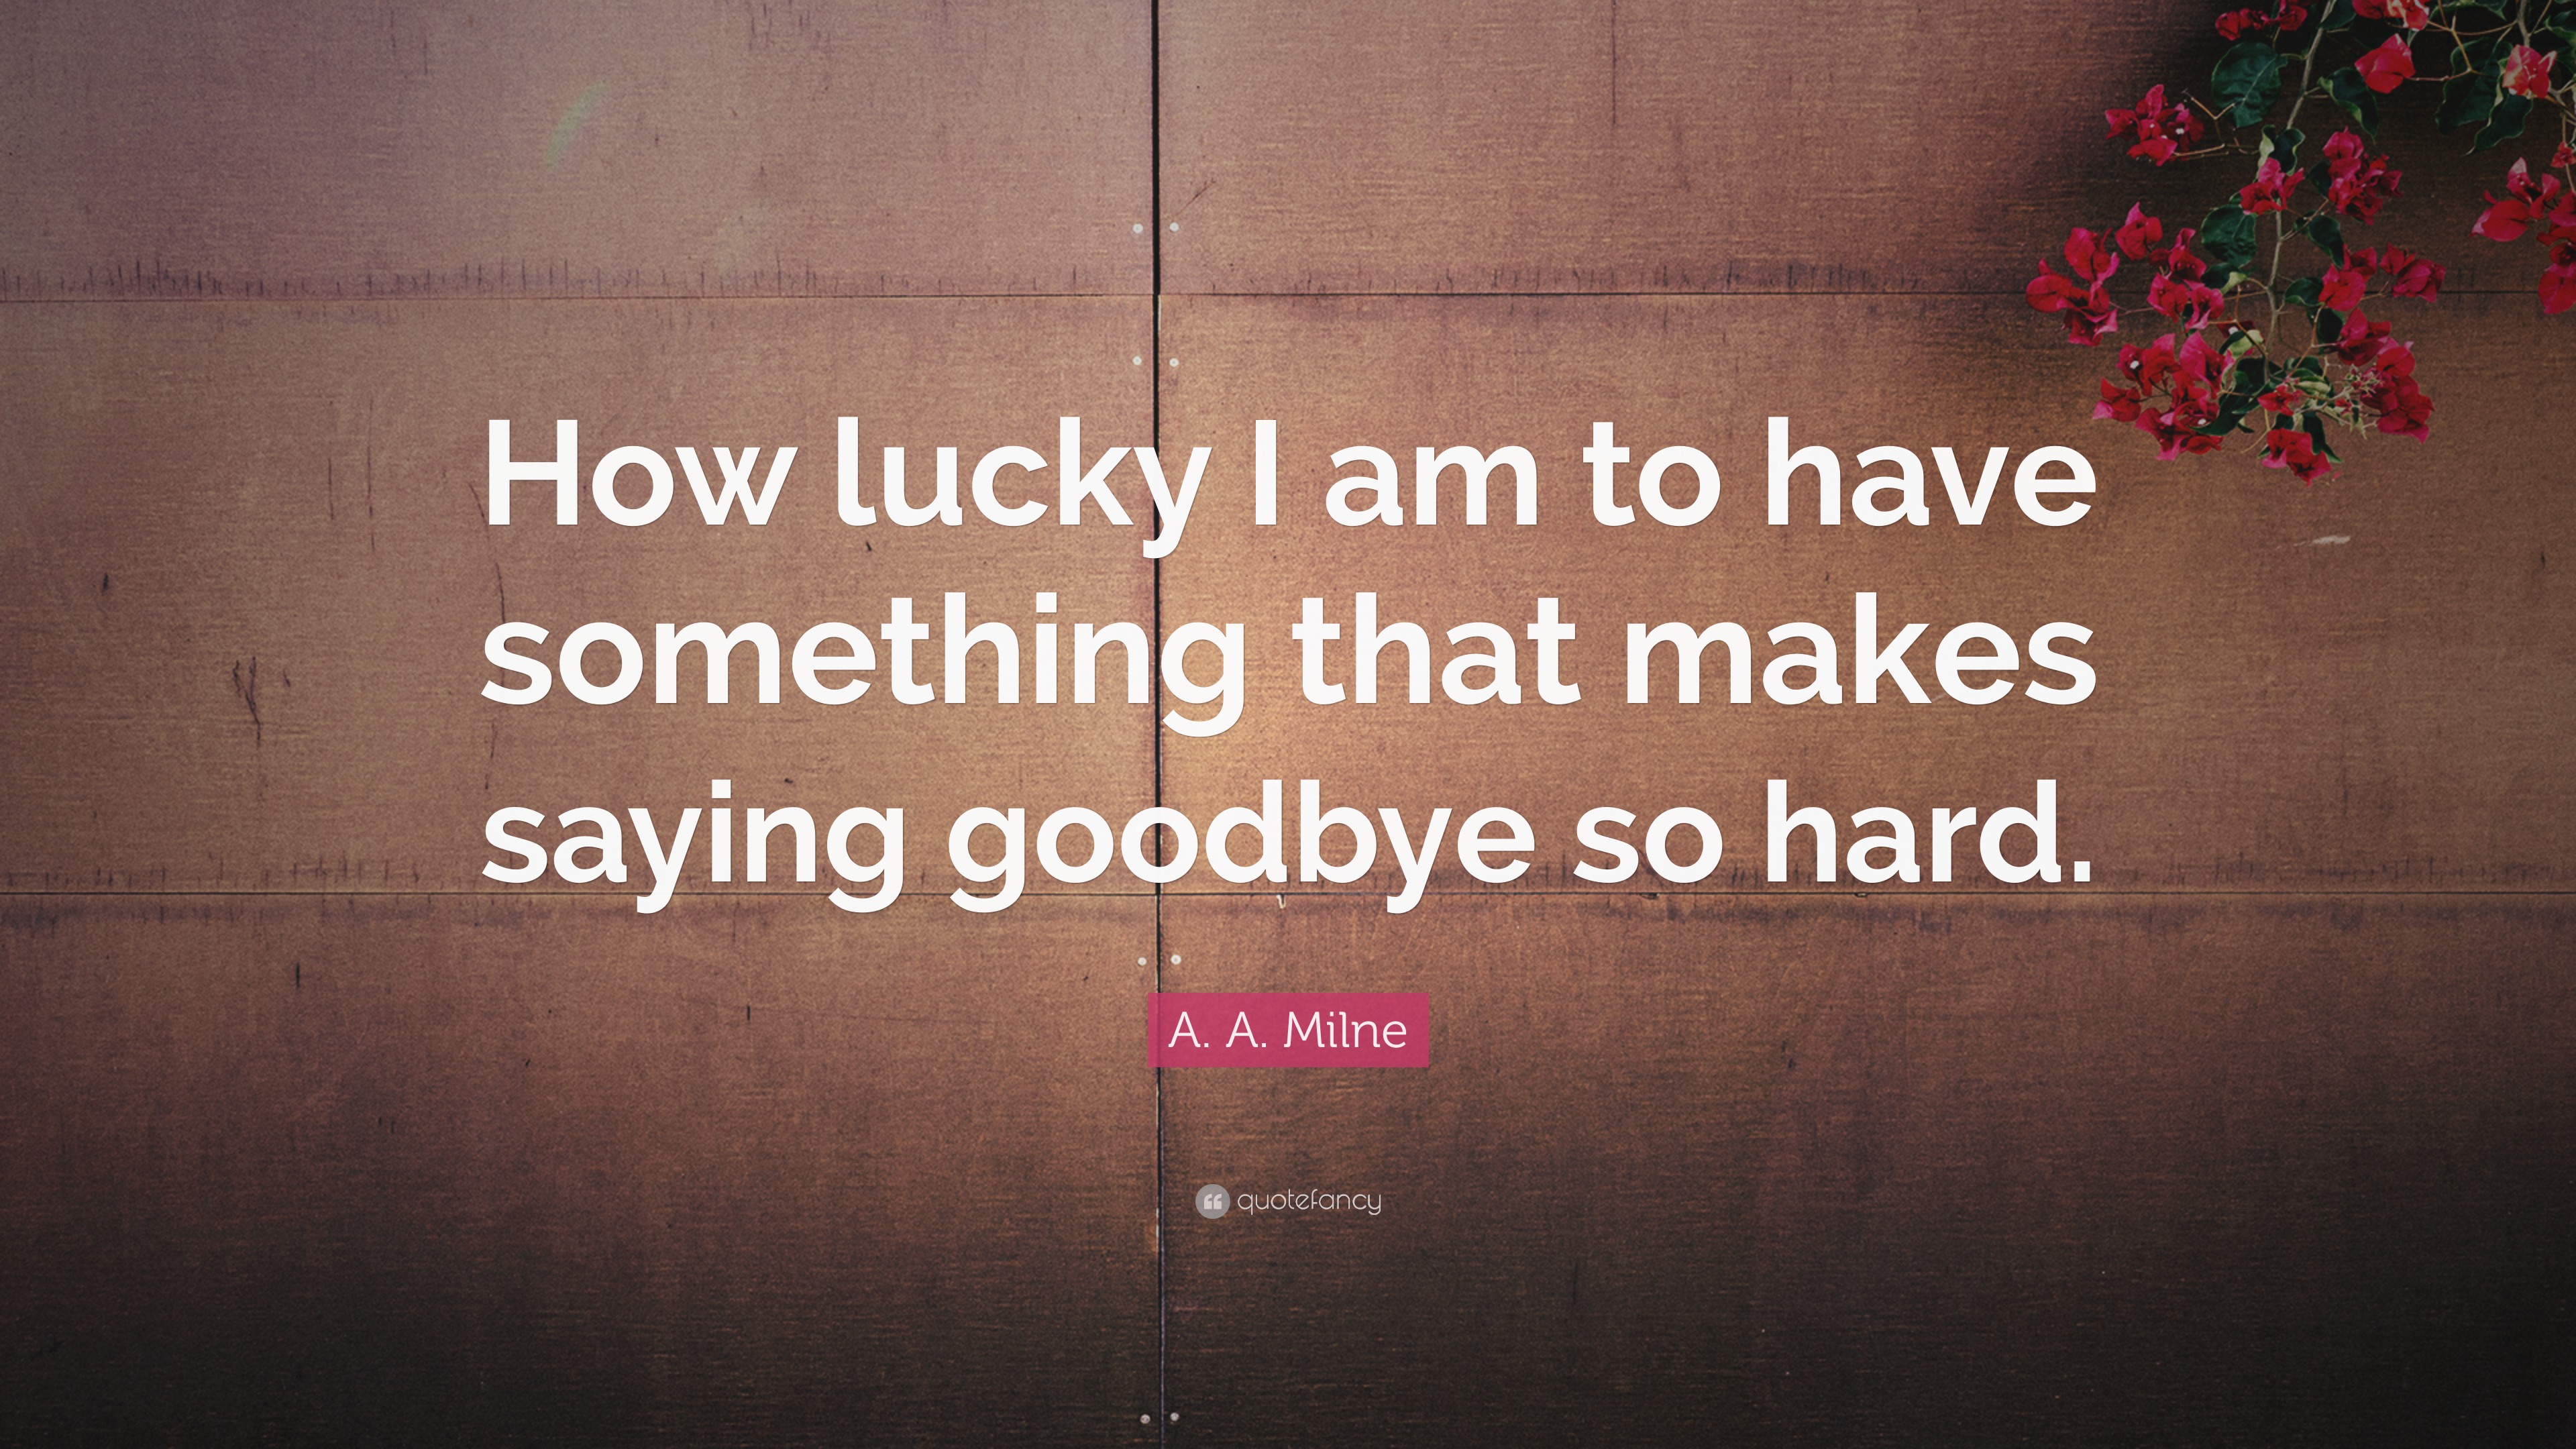 A A Milne Quote “How lucky I am to have something that makes saying goodbye